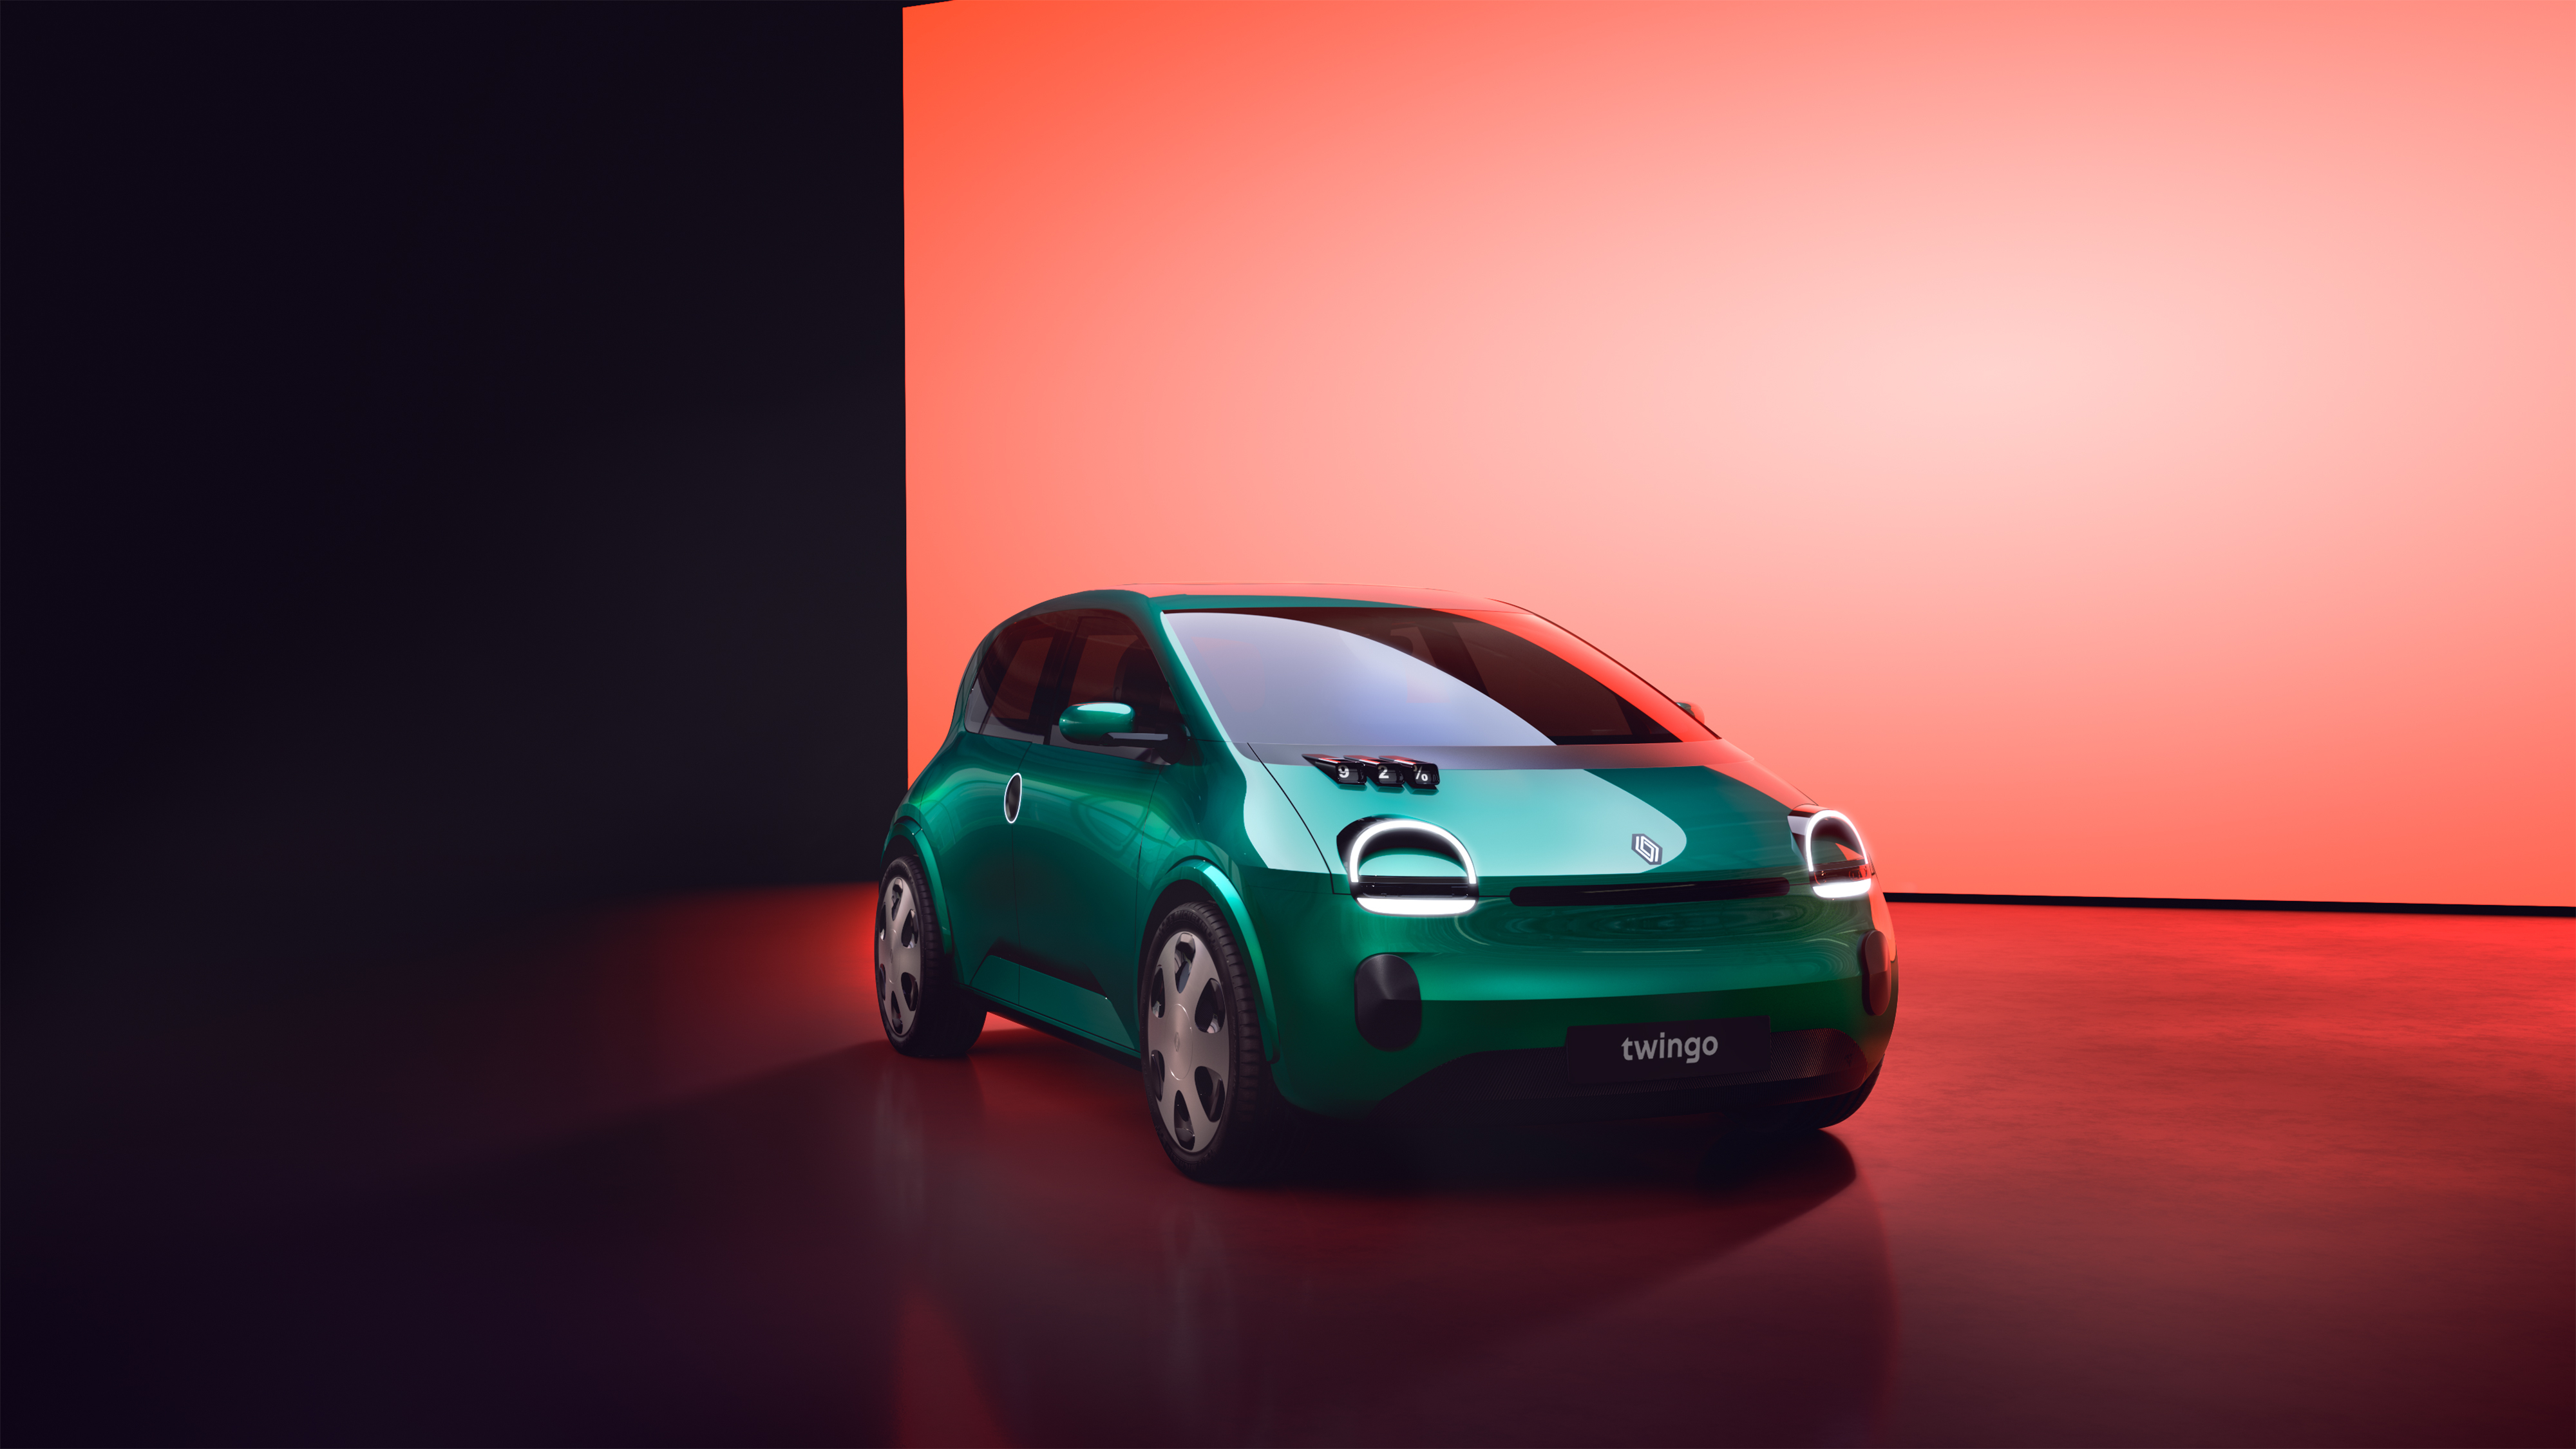 Renault brings back the Twingo as an EV